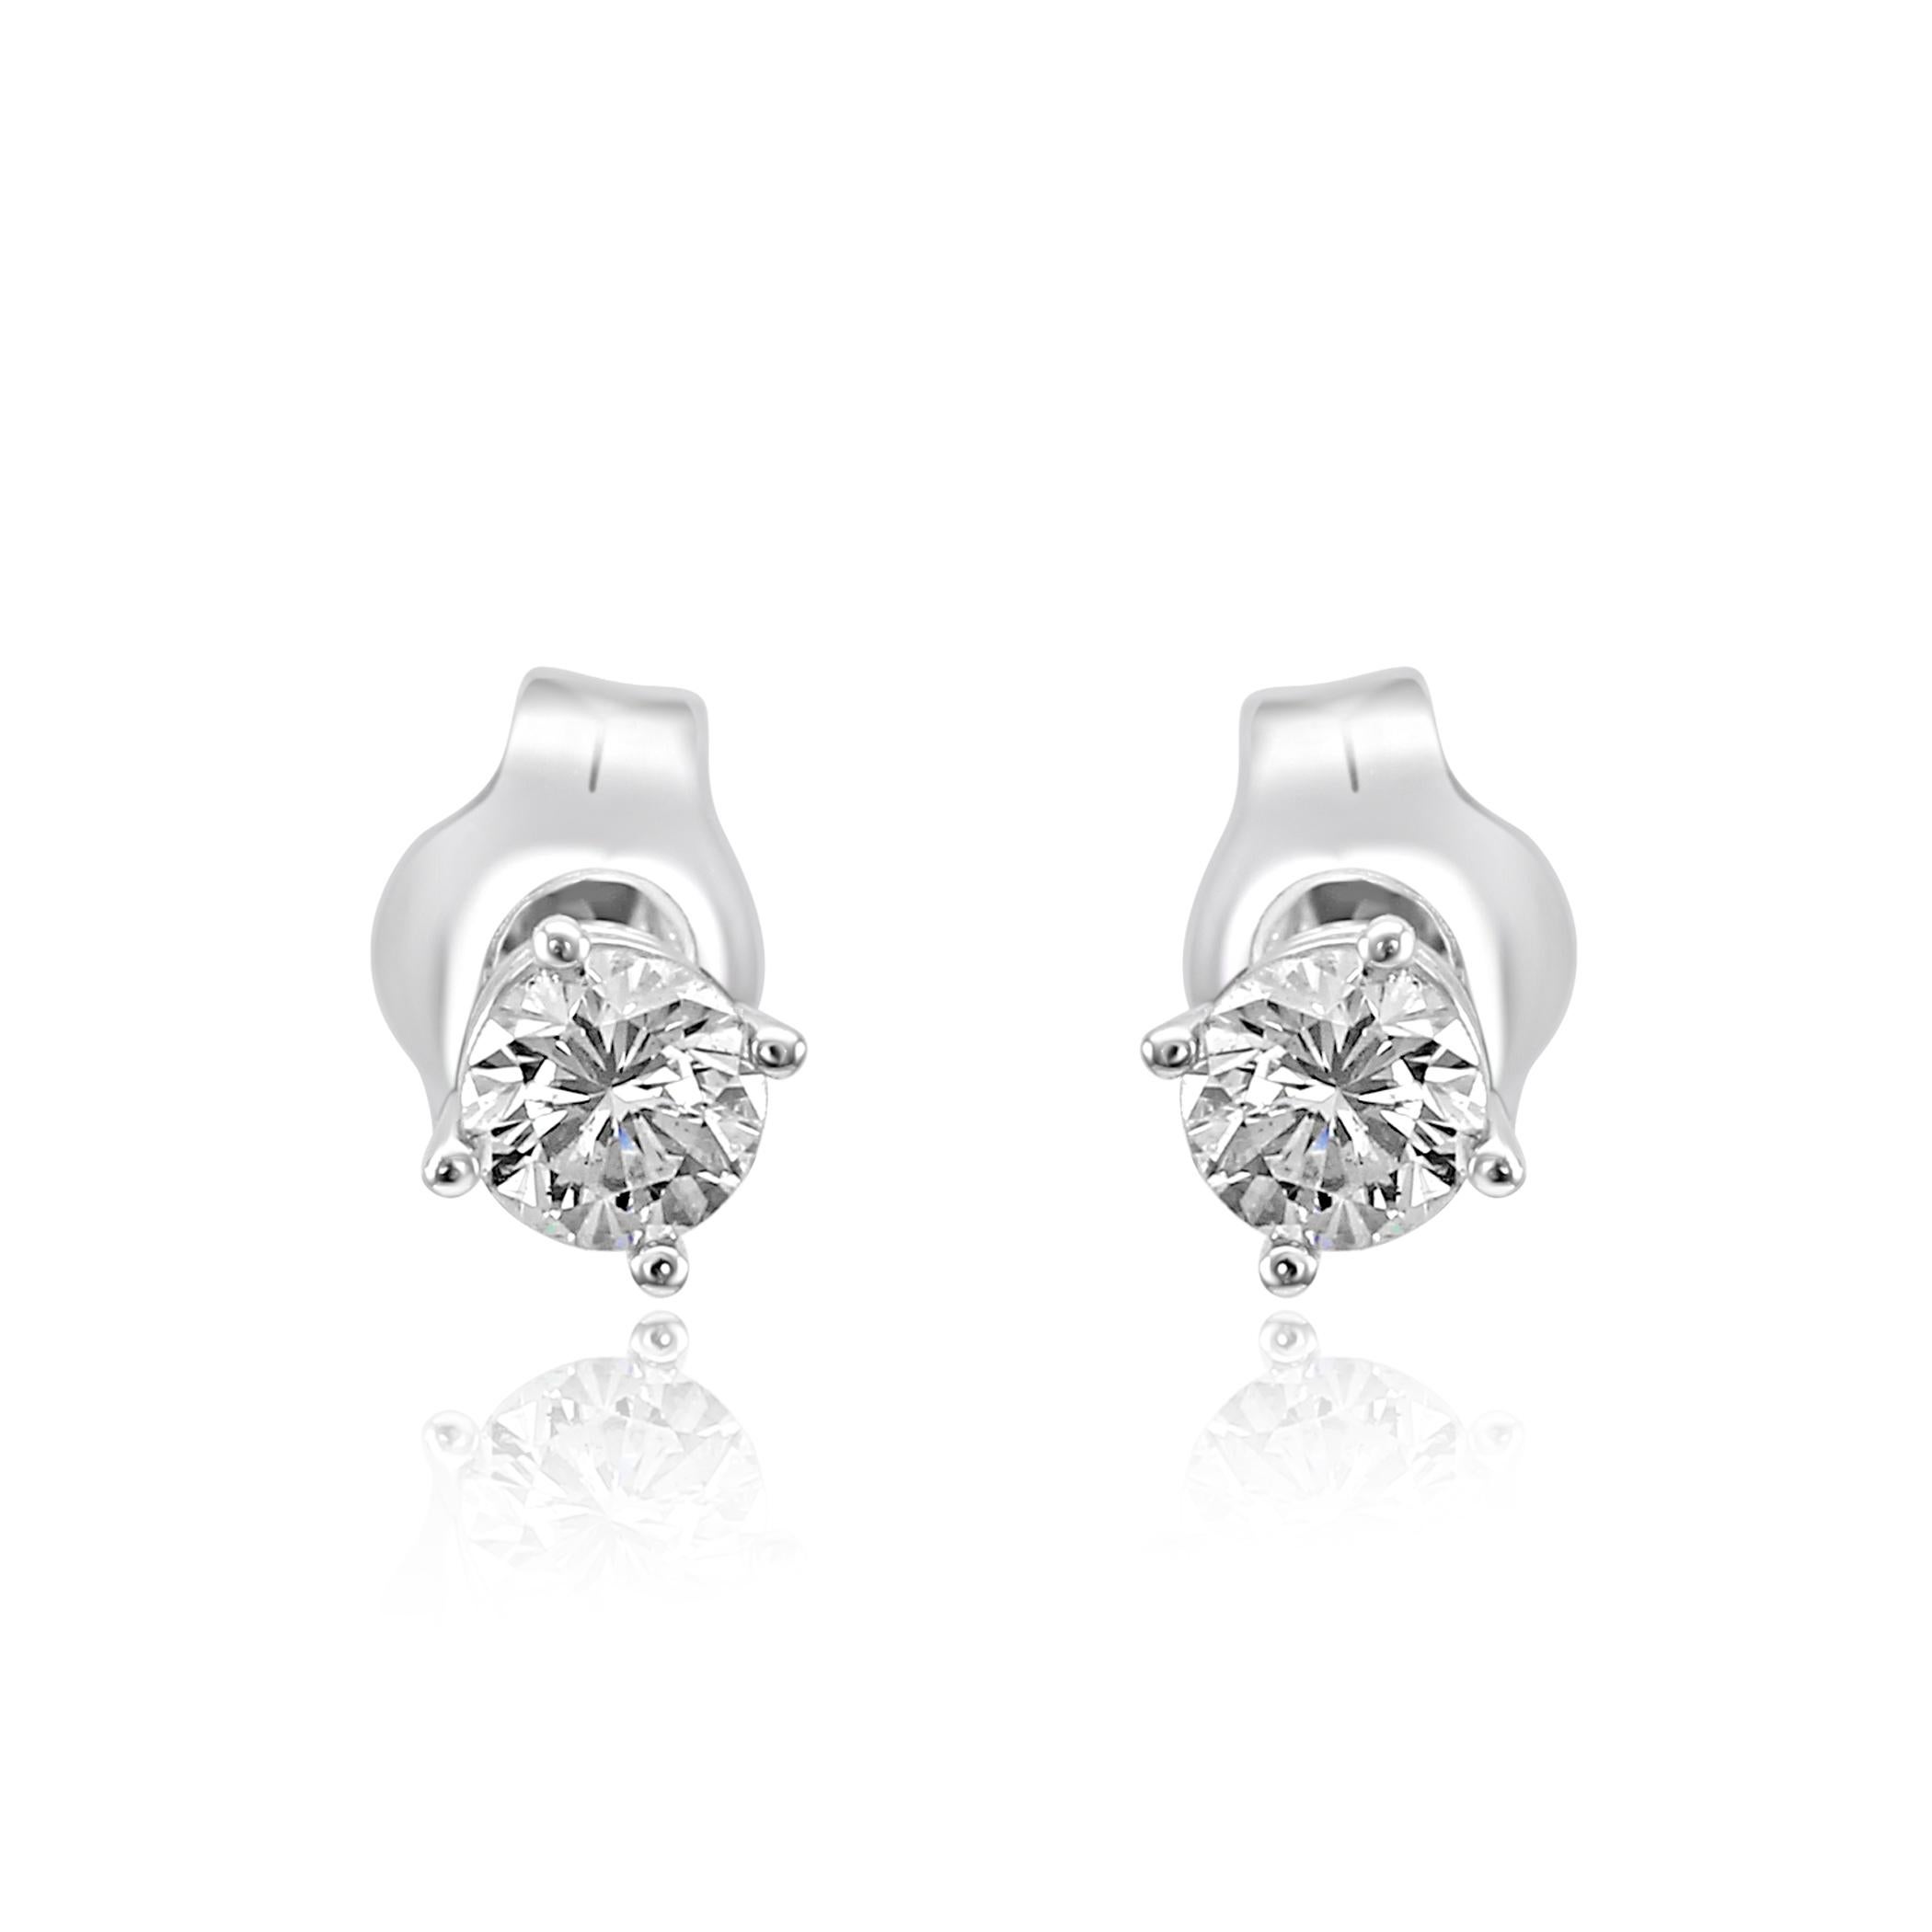 0.25 Carat Total Weight White H-I Color Si Clarity Diamond Round in 4 Prong Classic Studs in 14K White Gold Push back style.

MADE IN USA
 Style available in different price ranges, can be customized or custom made as per your requirements. Prices